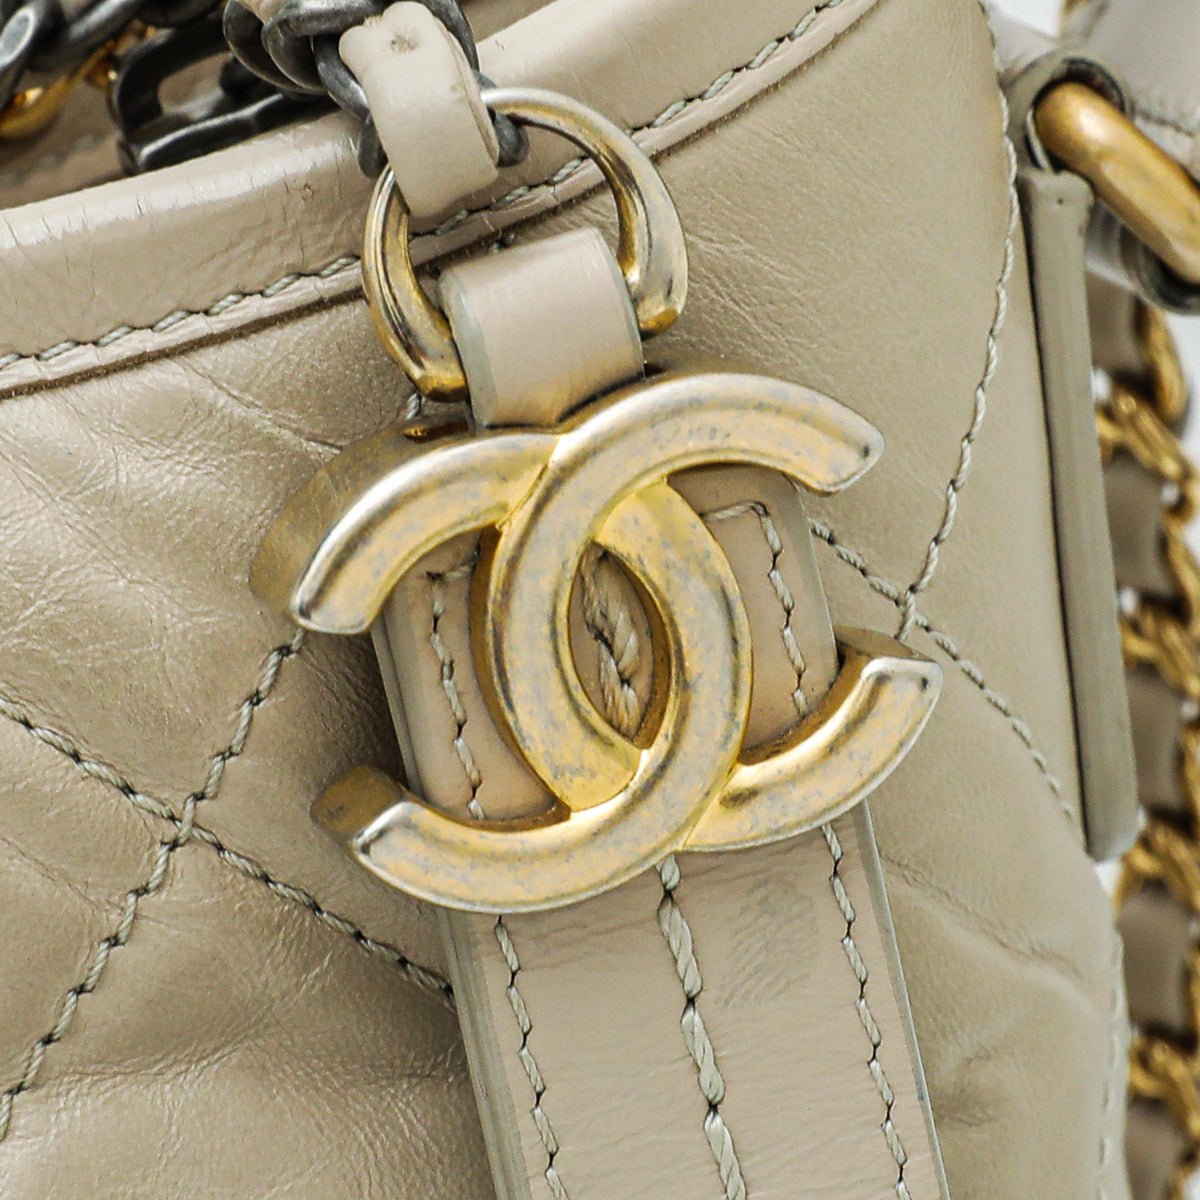 Chanel - Chanel Beige Aged Gabrielle Hobo Small Bag | The Closet